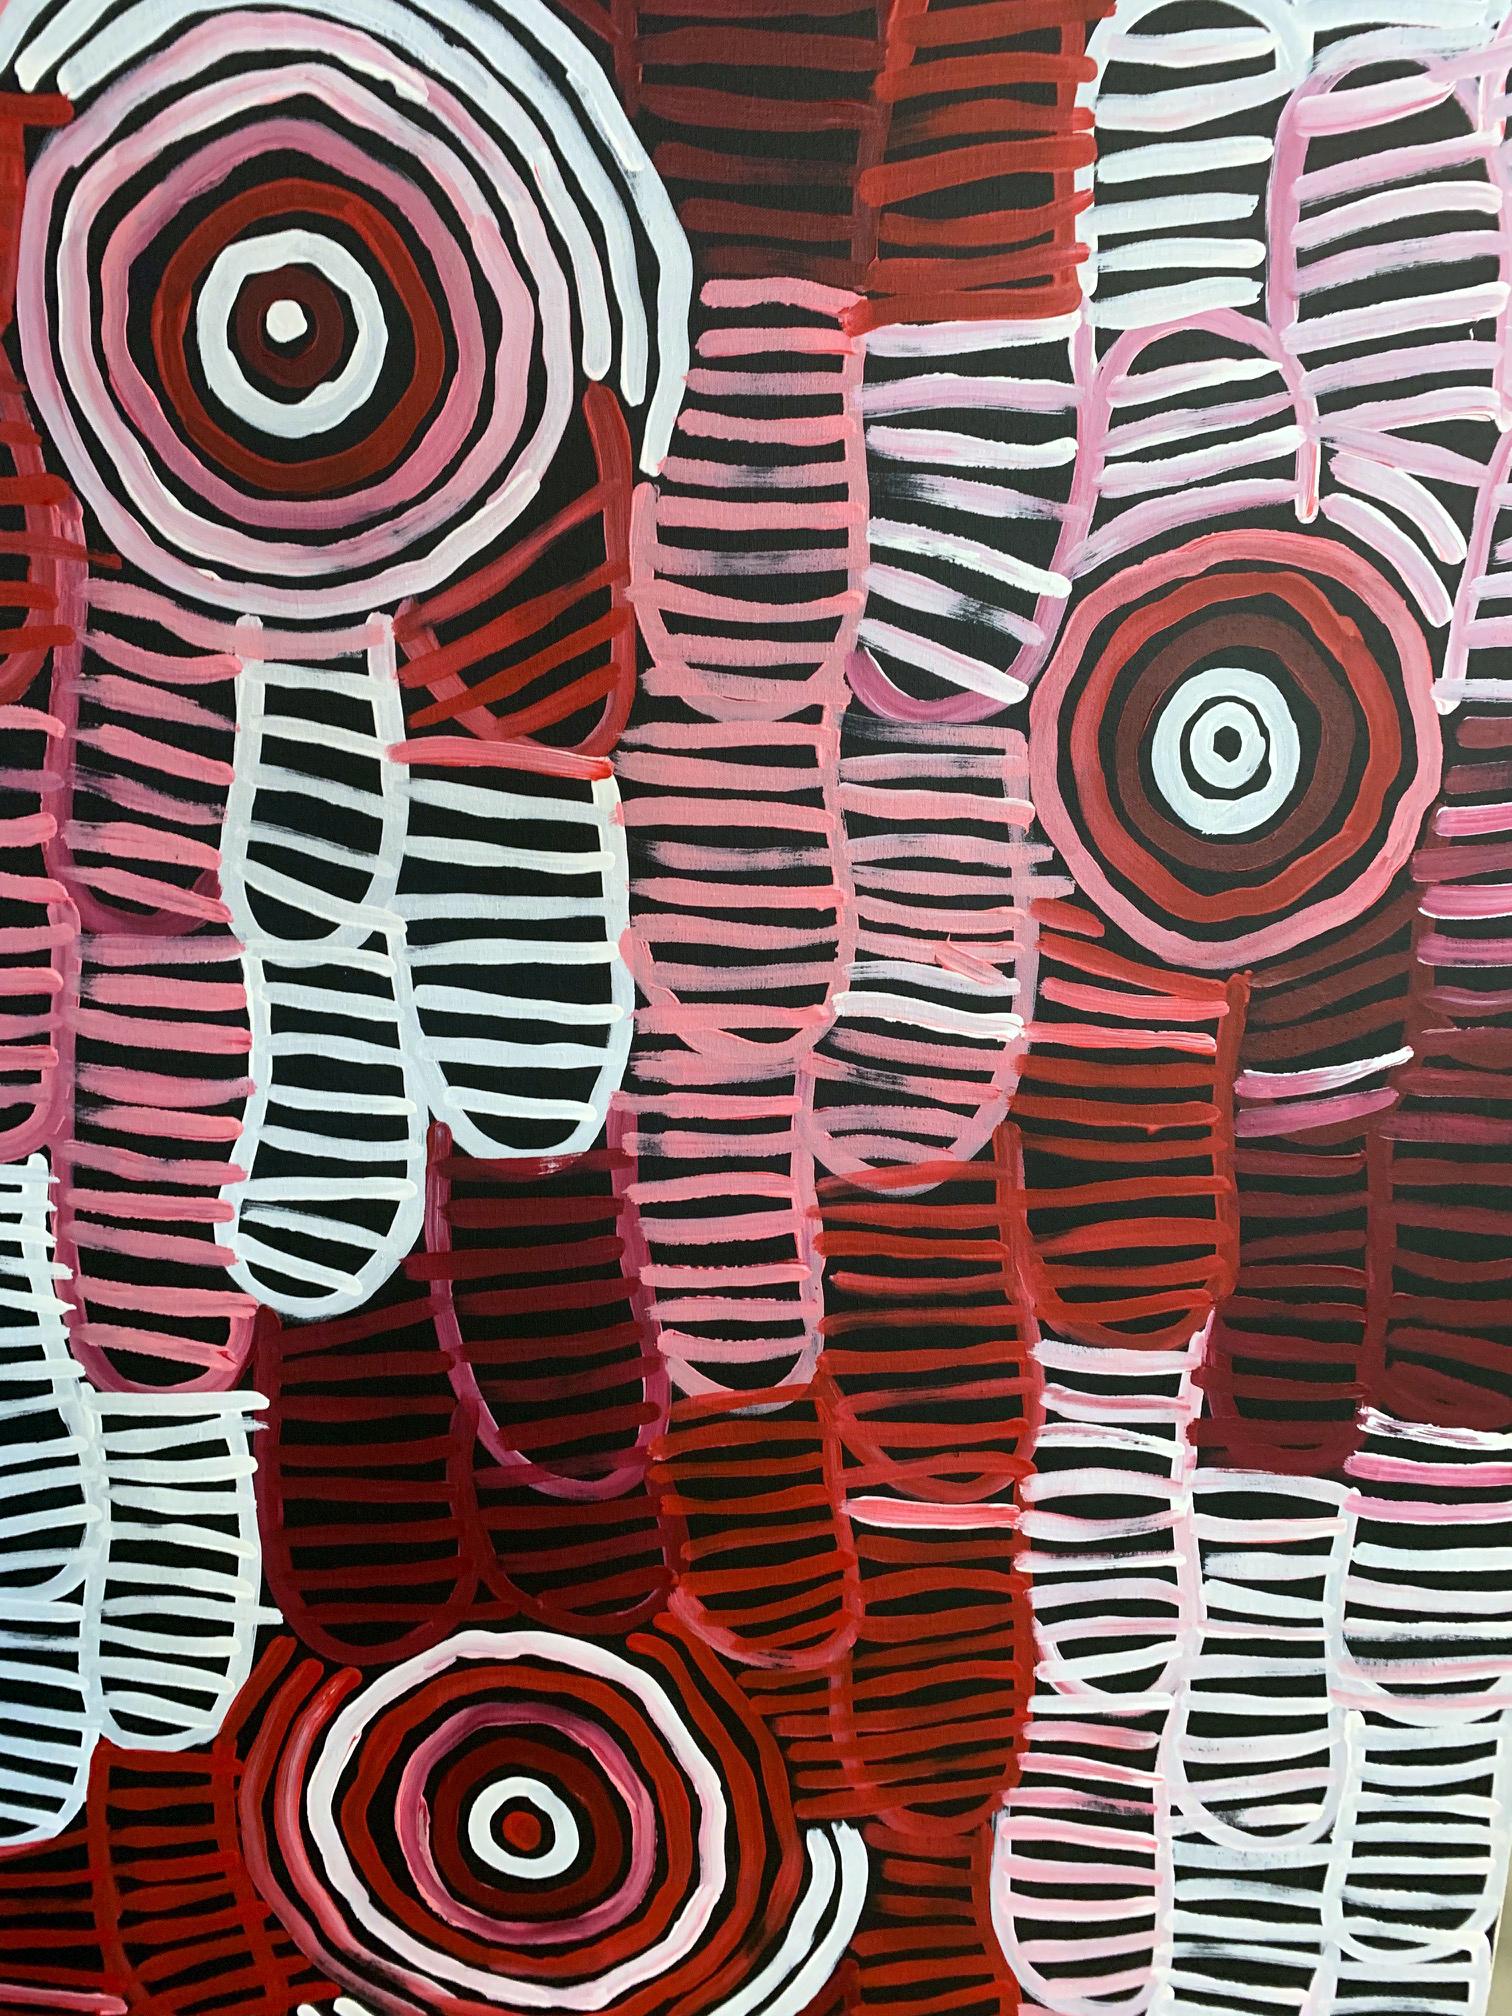 A striking painting by famed Australian aboriginal artist Minnie Pwerle depicting her country 